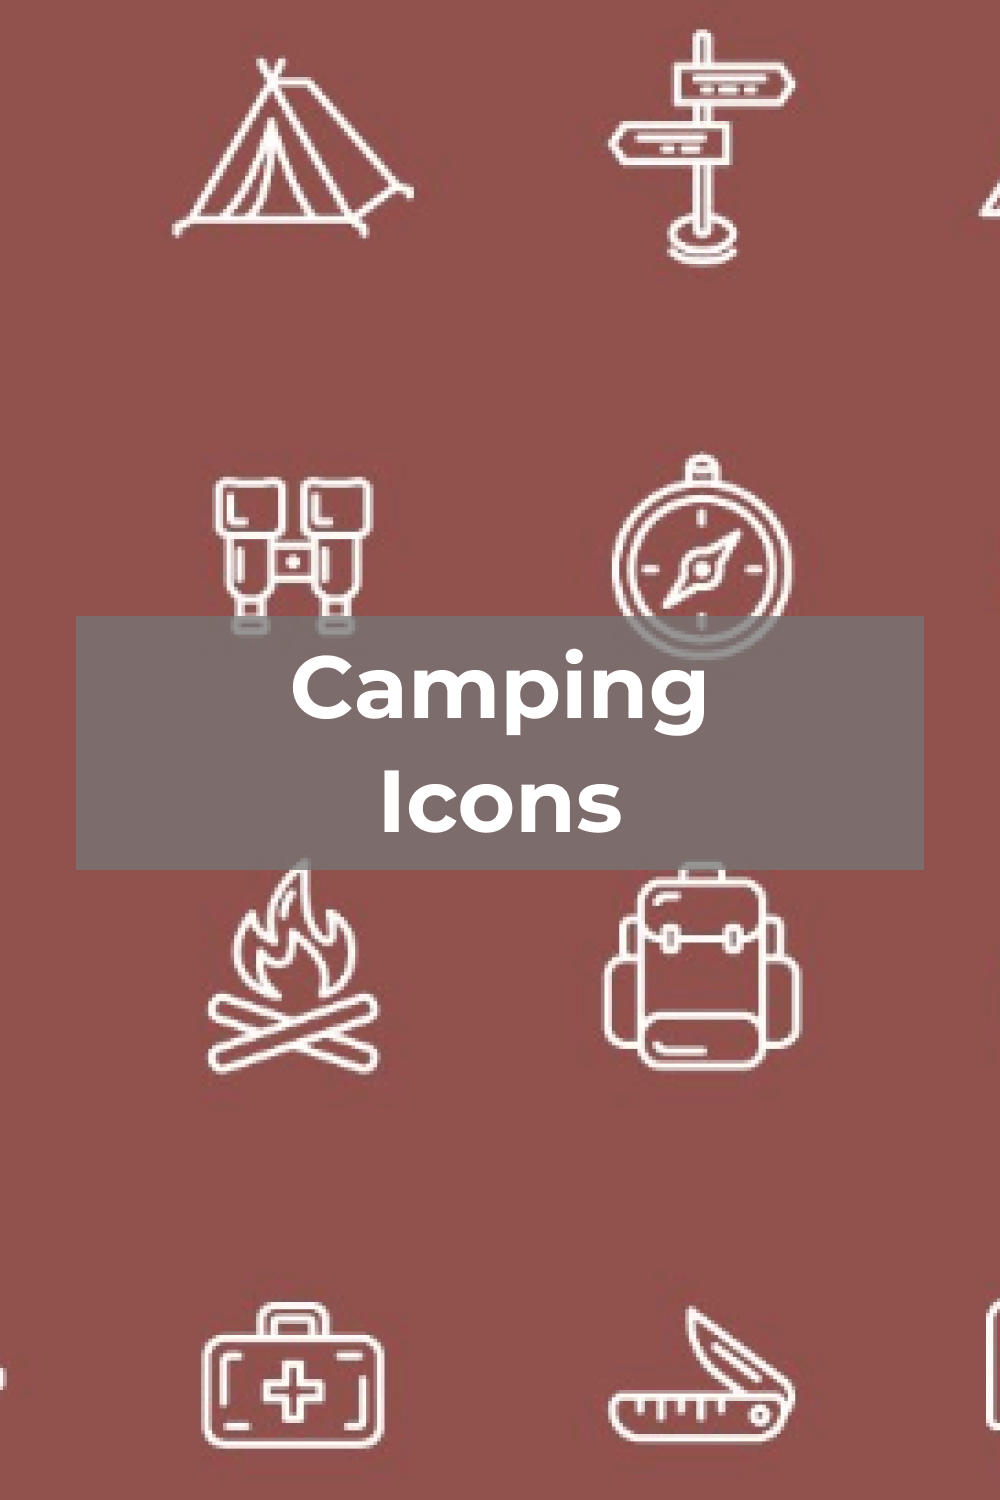 Camping Icons on your mobile phone.